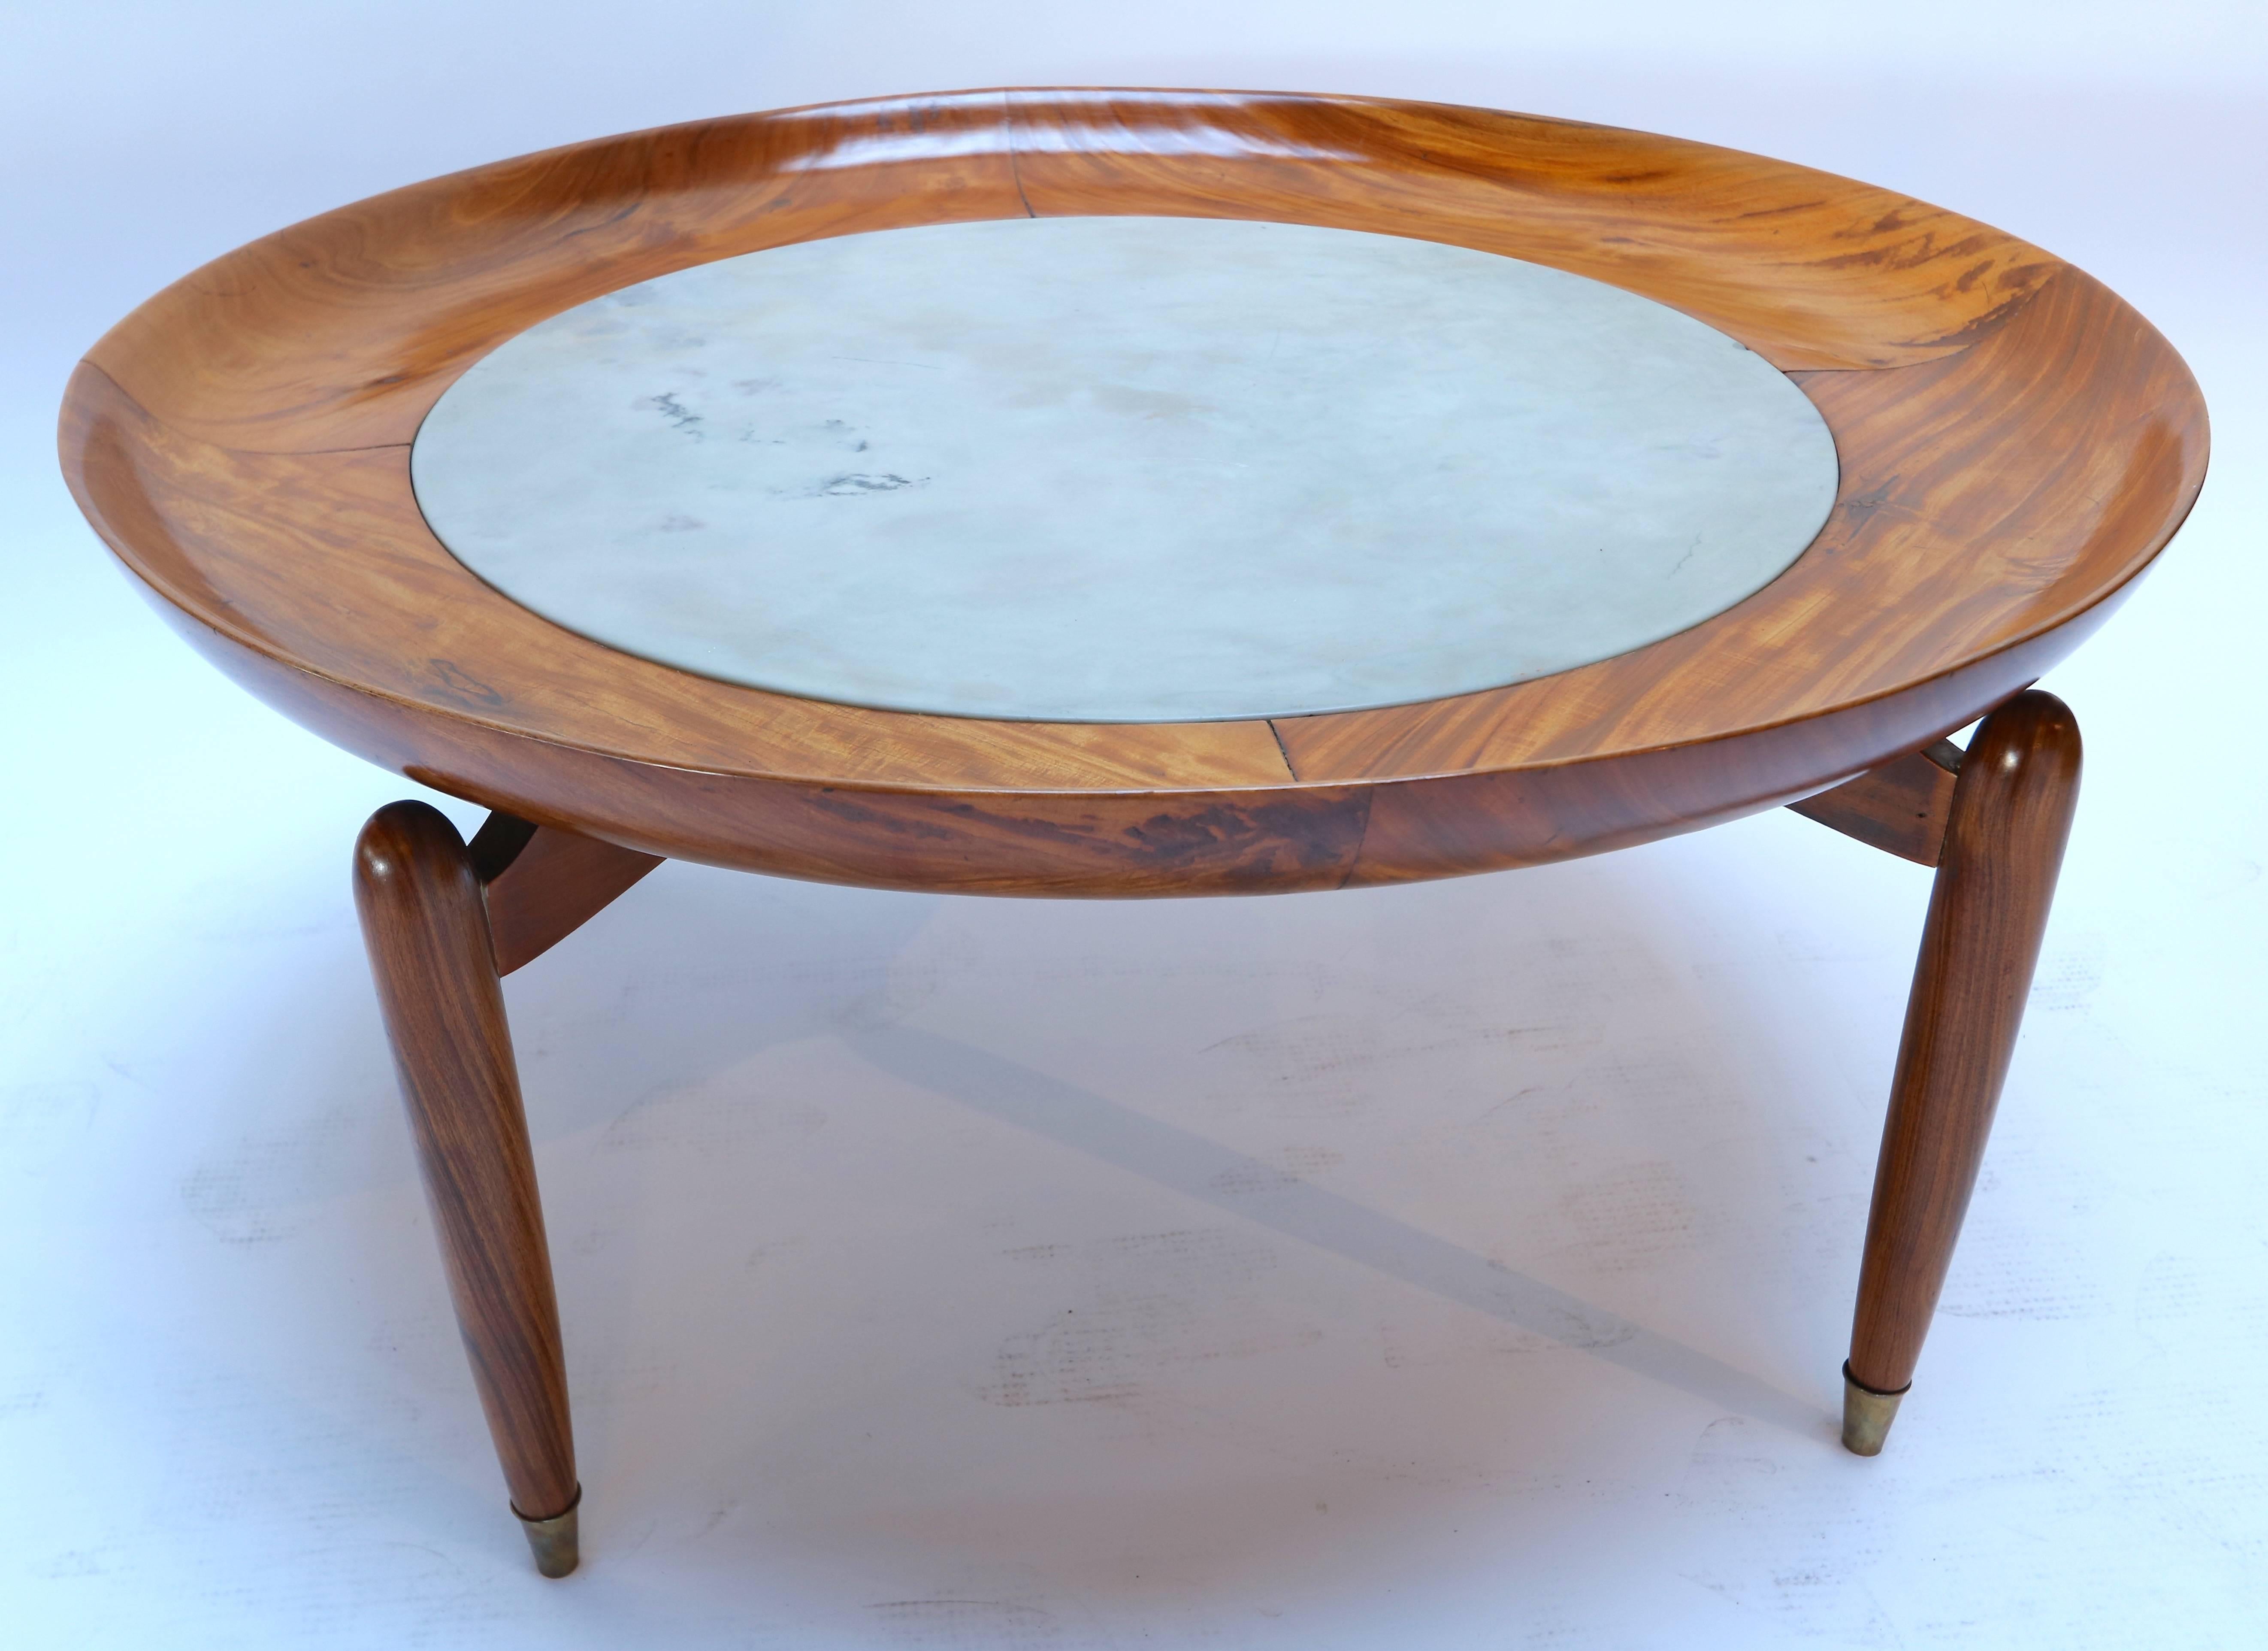 1960s Brazilian round caviuna wood coffee table with a marble top by Giuseppe Scapinelli.